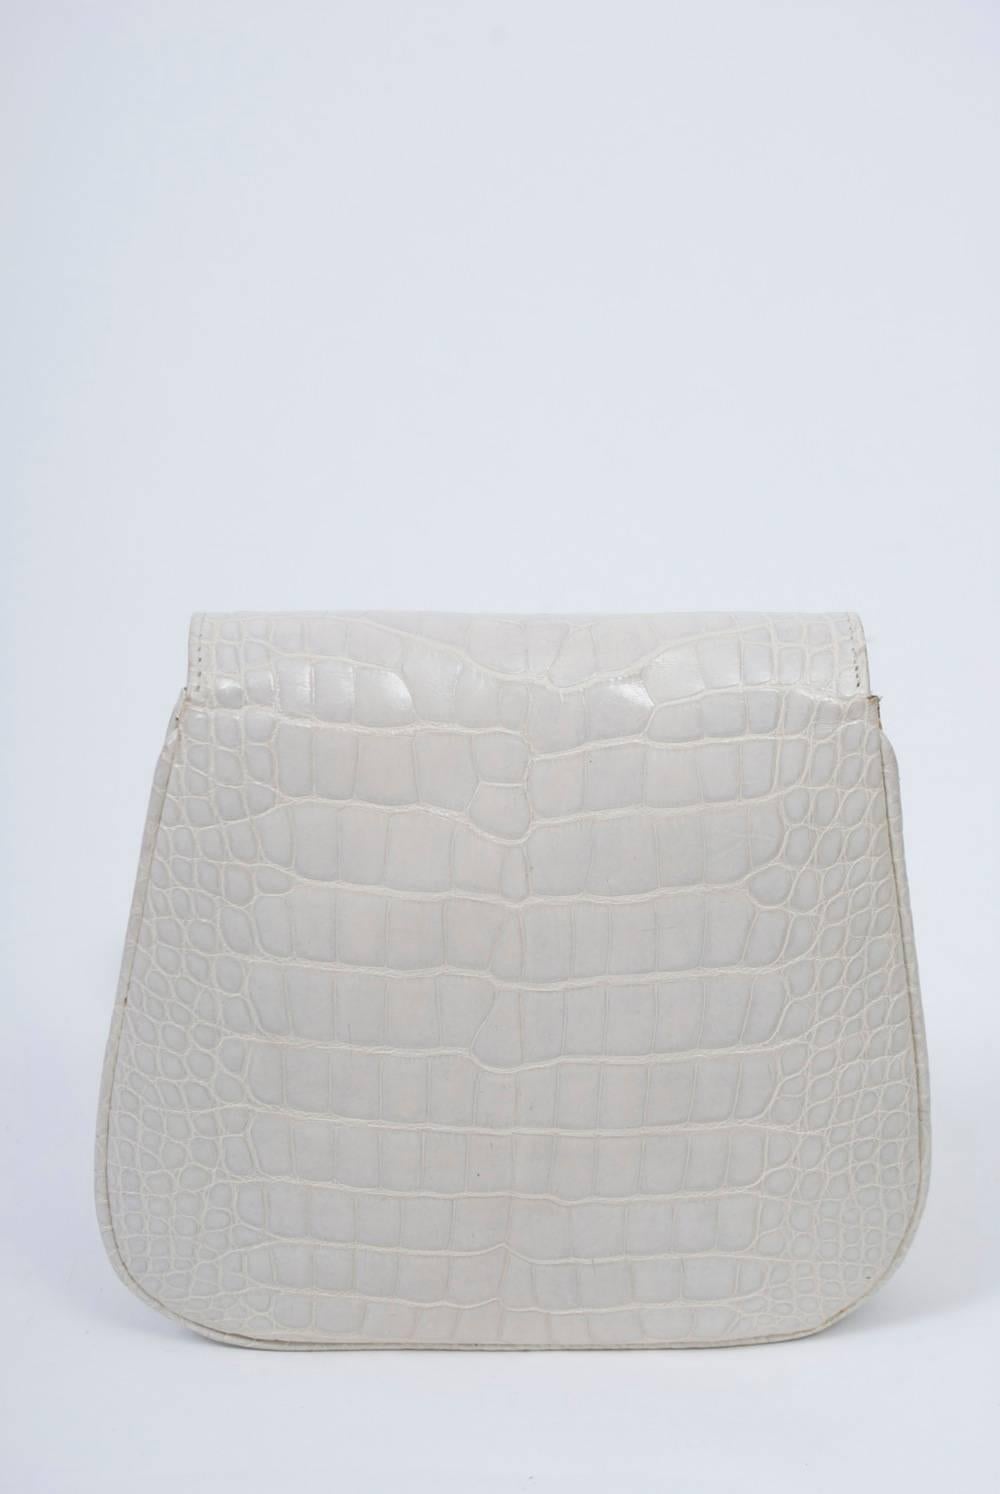 Lana White Alligator Clutch with Two Shoulder Straps 1